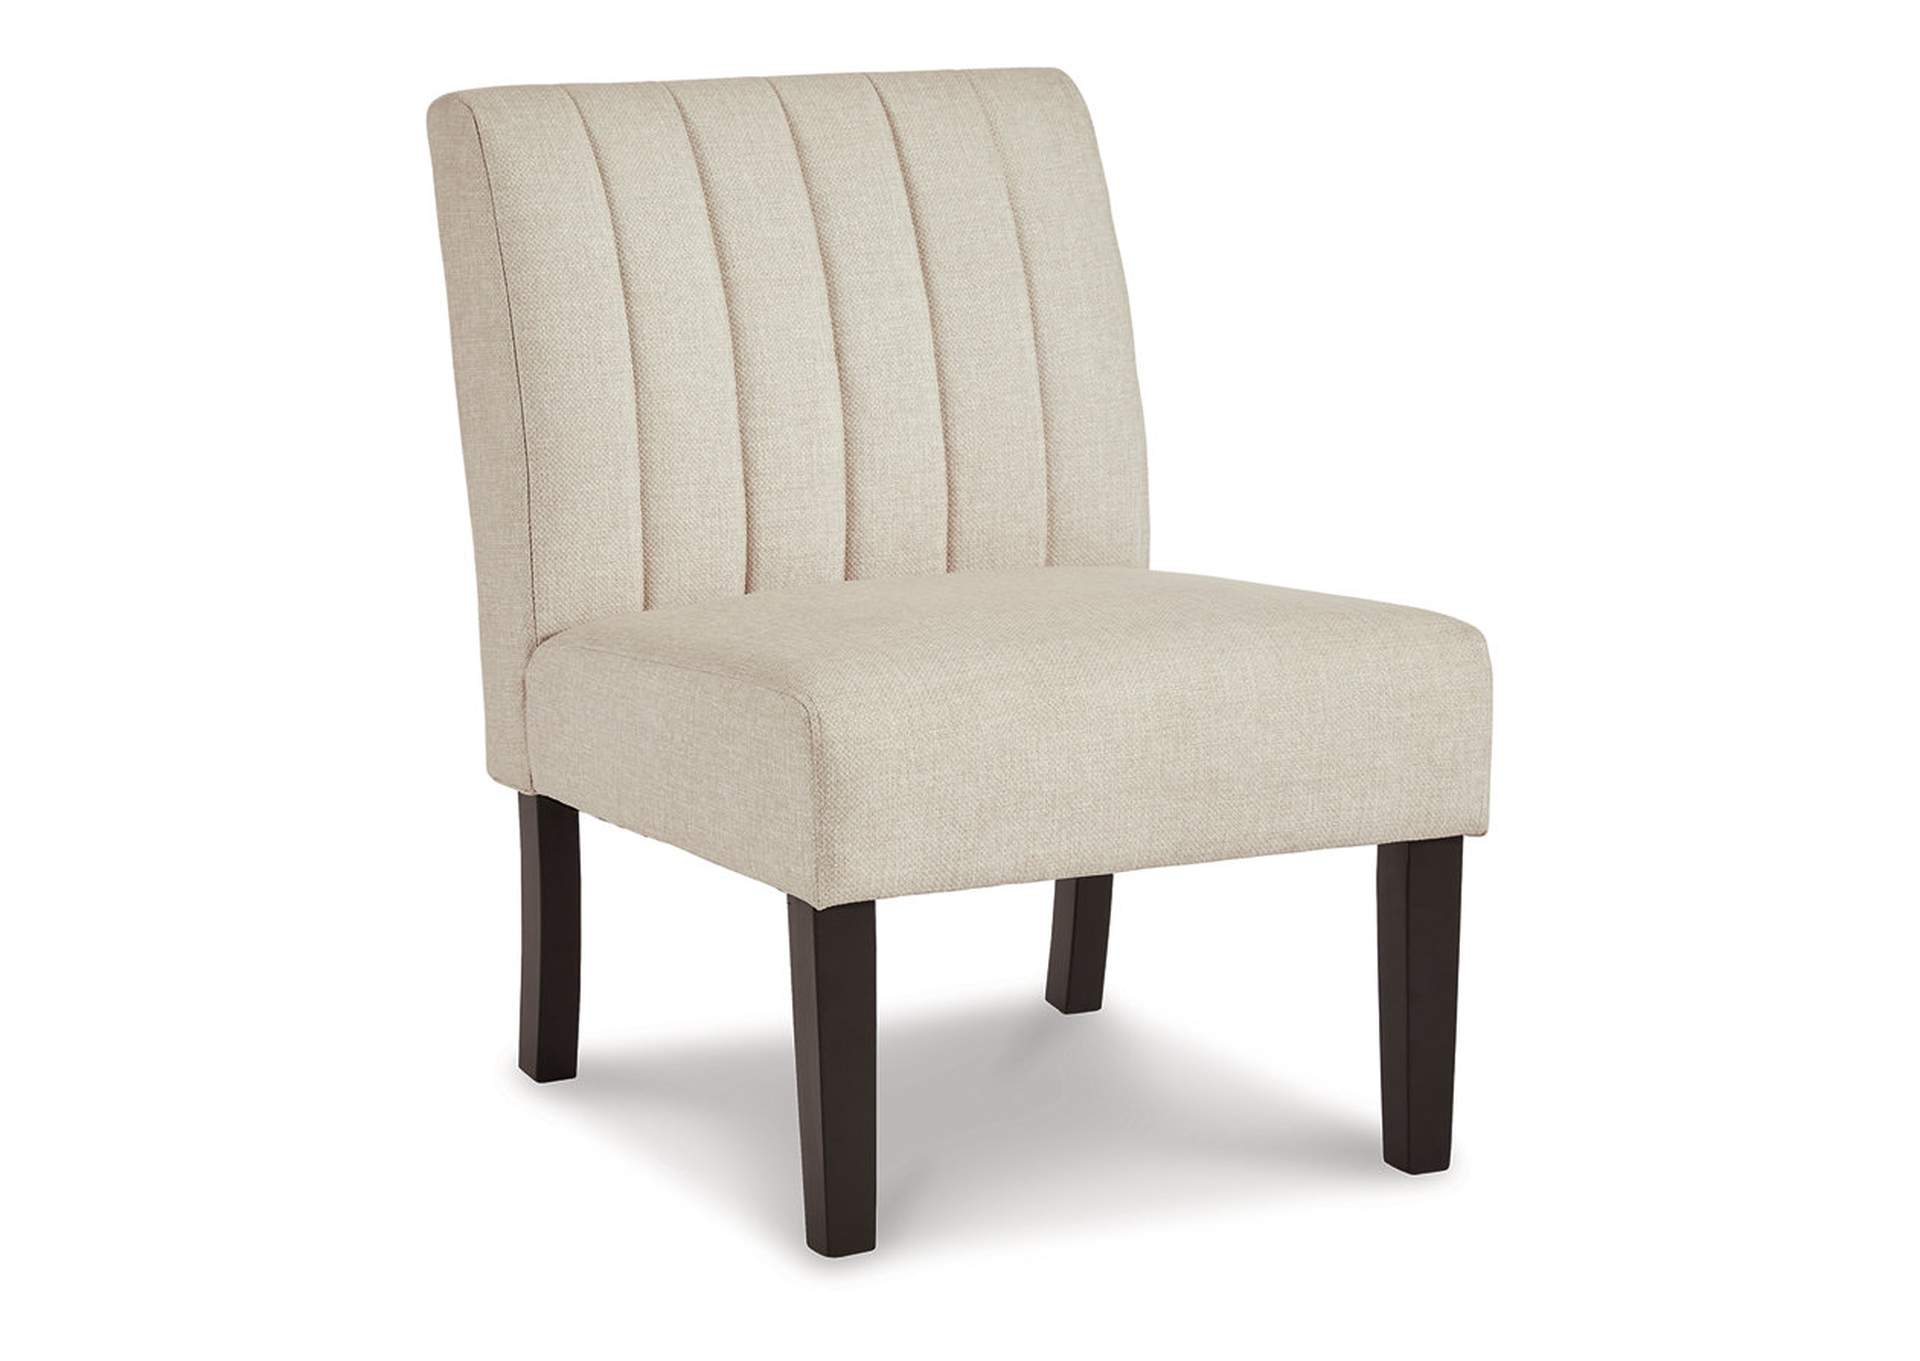 Hughleigh Accent Chair,Signature Design By Ashley